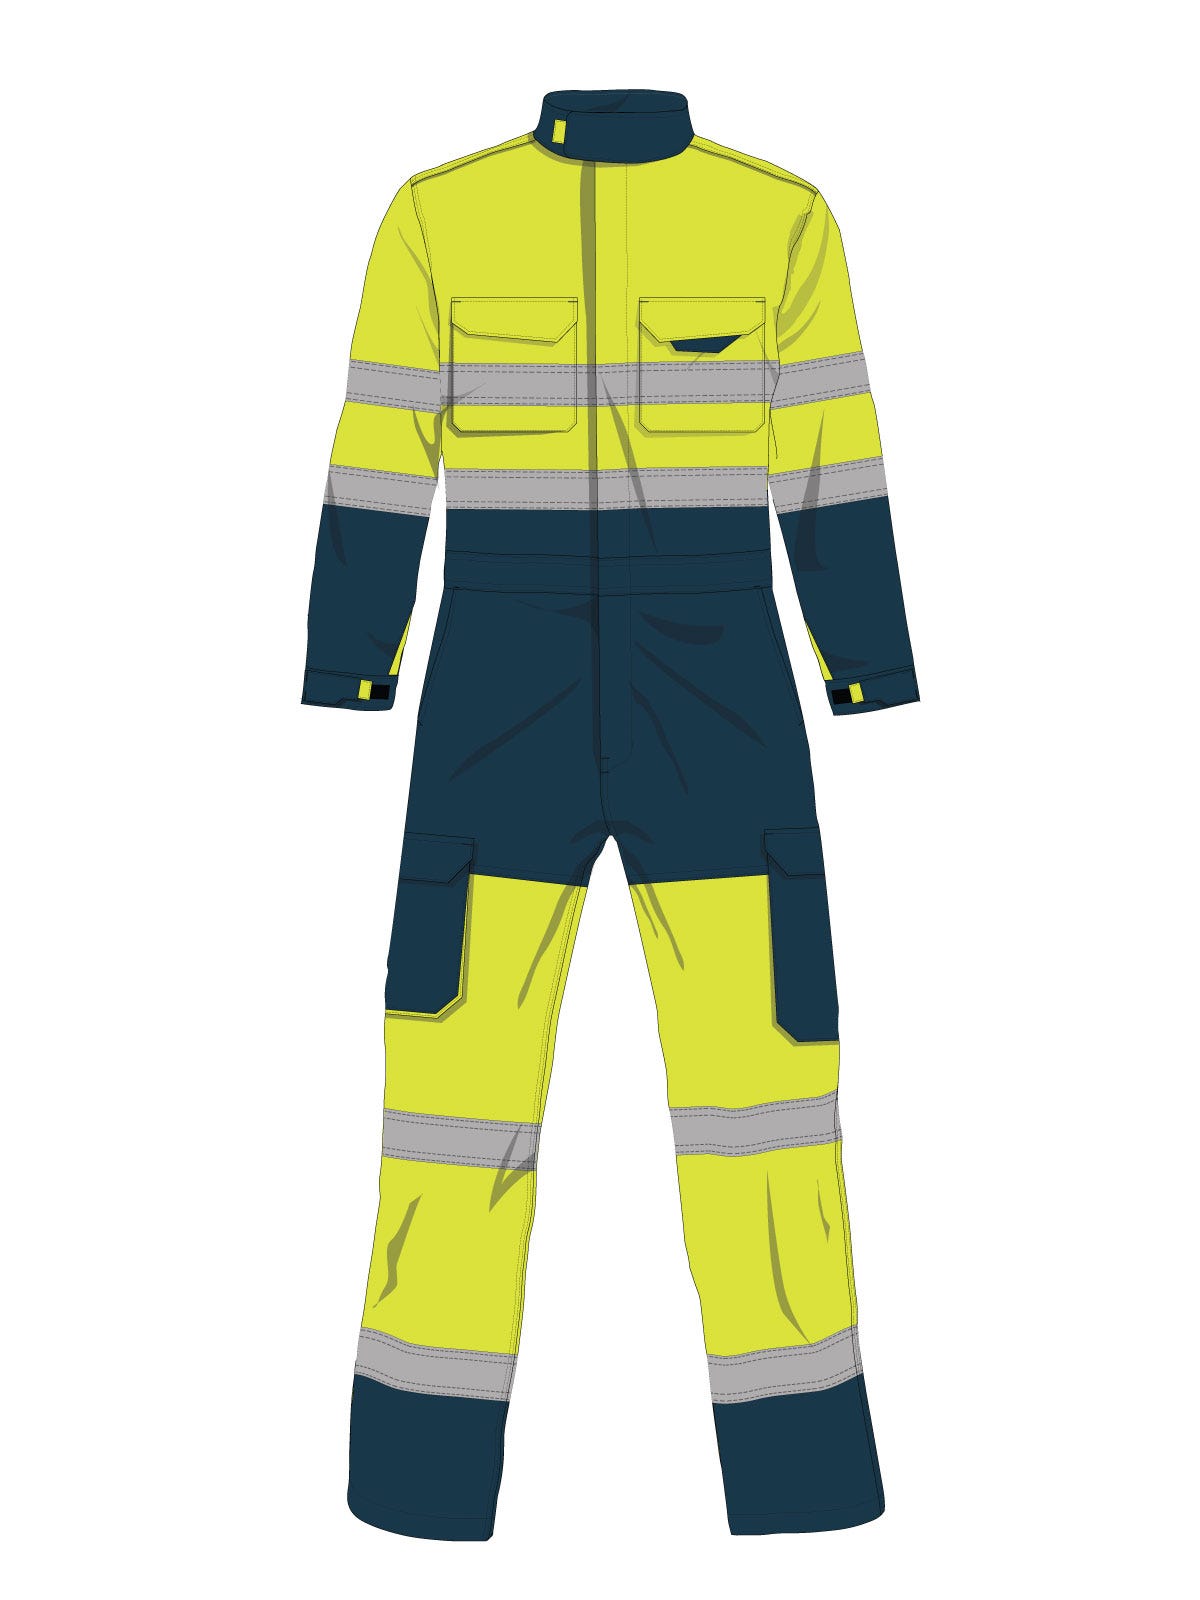 Beyond Protection: How FR Coveralls Enhance Work Productivity and Confidence 